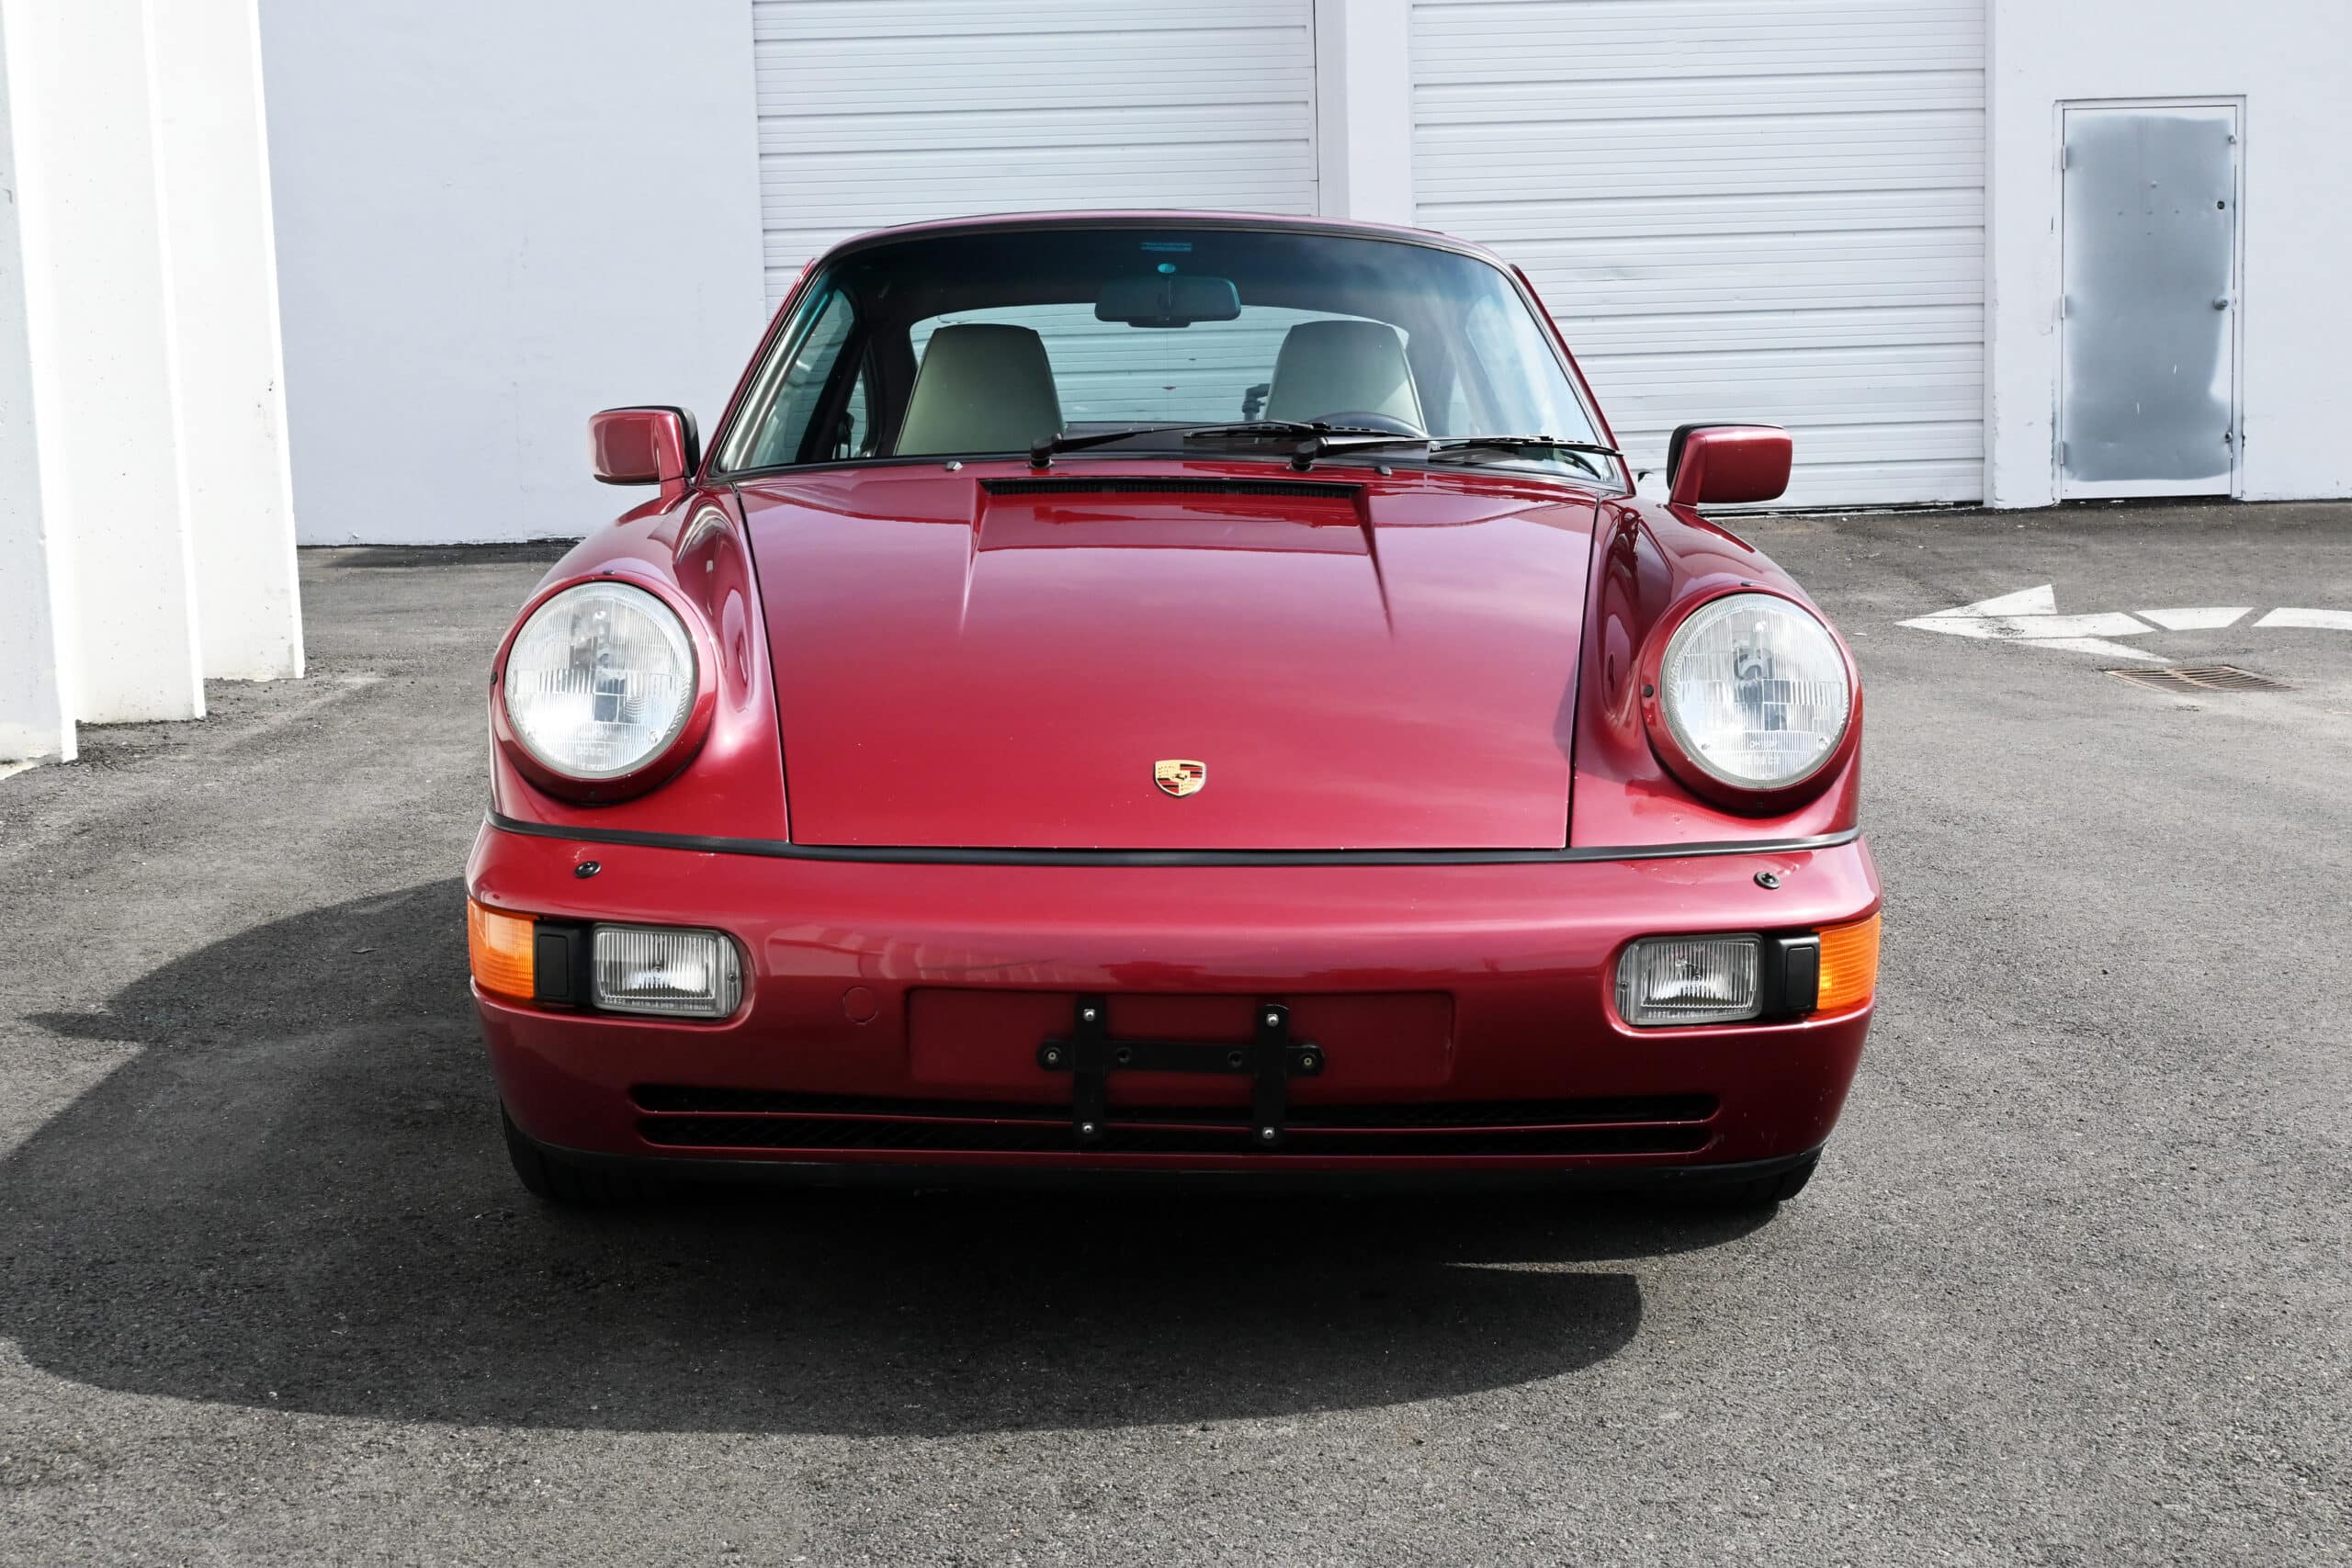 1990 964 Carrera 4, Special color with Special deviating leather interior, One owner, Documented 37K Actual Miles, original paint